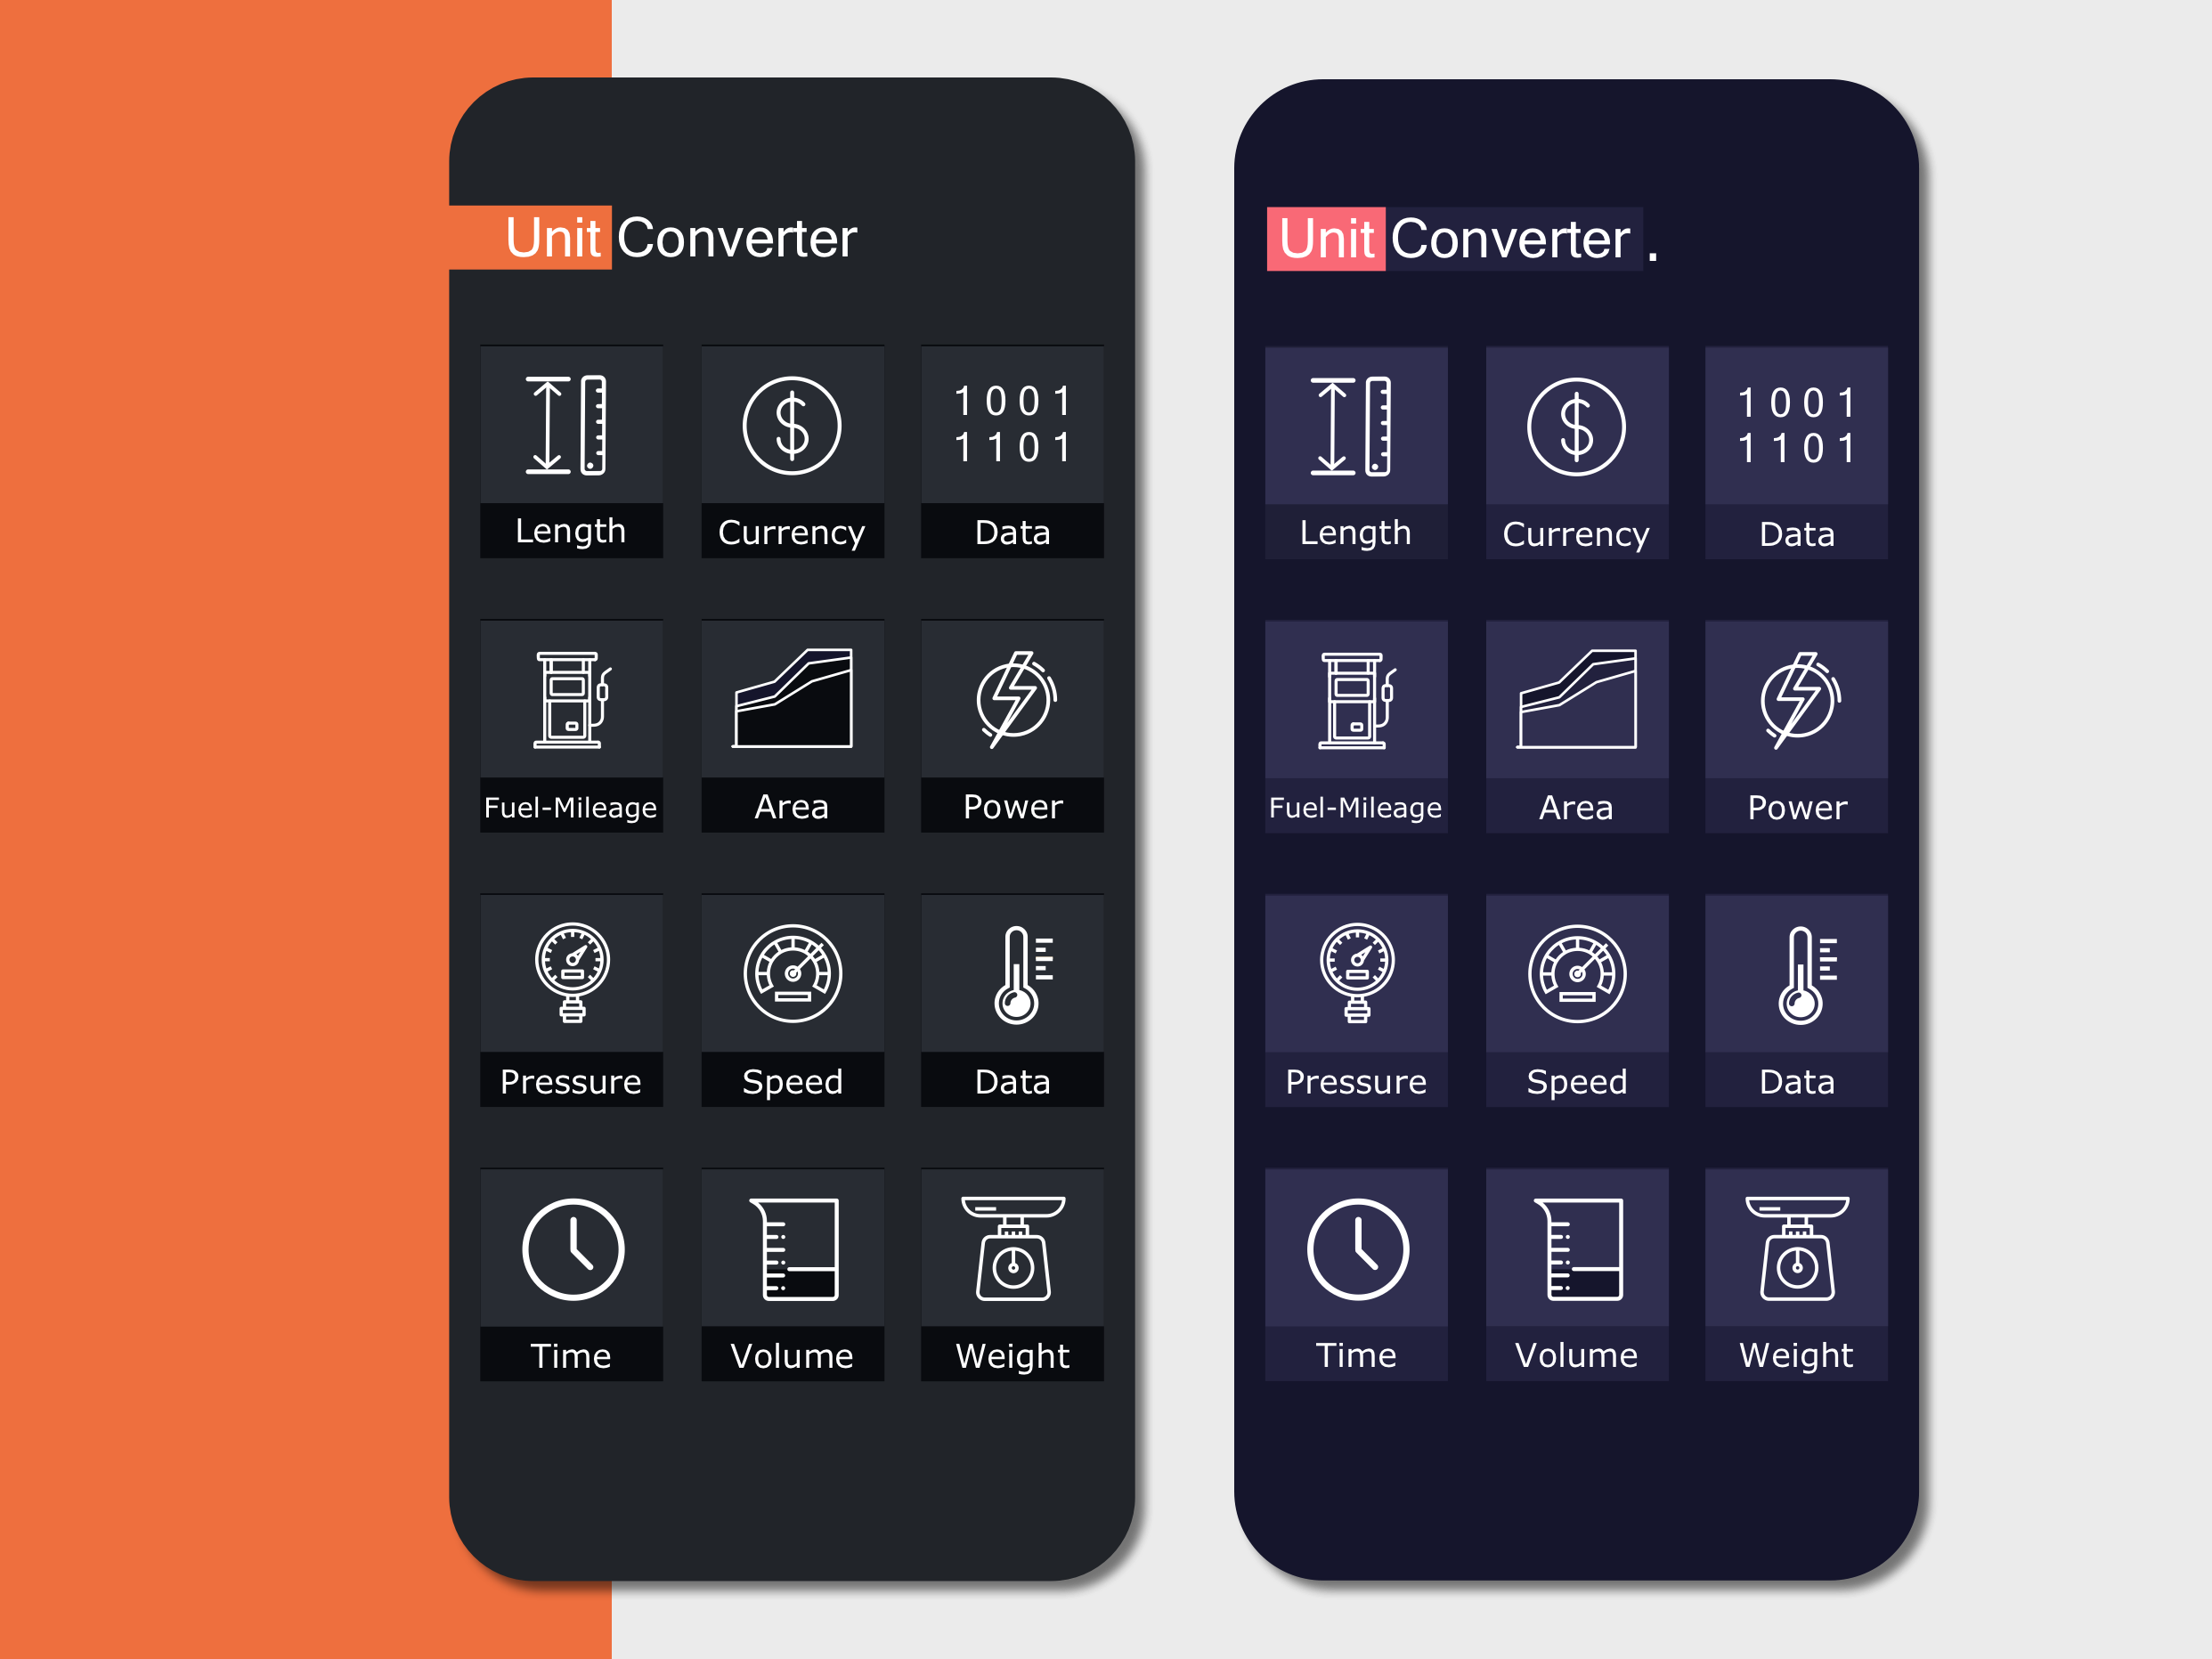 unit-converter-ios-project-by-harjot-singh-on-dribbble